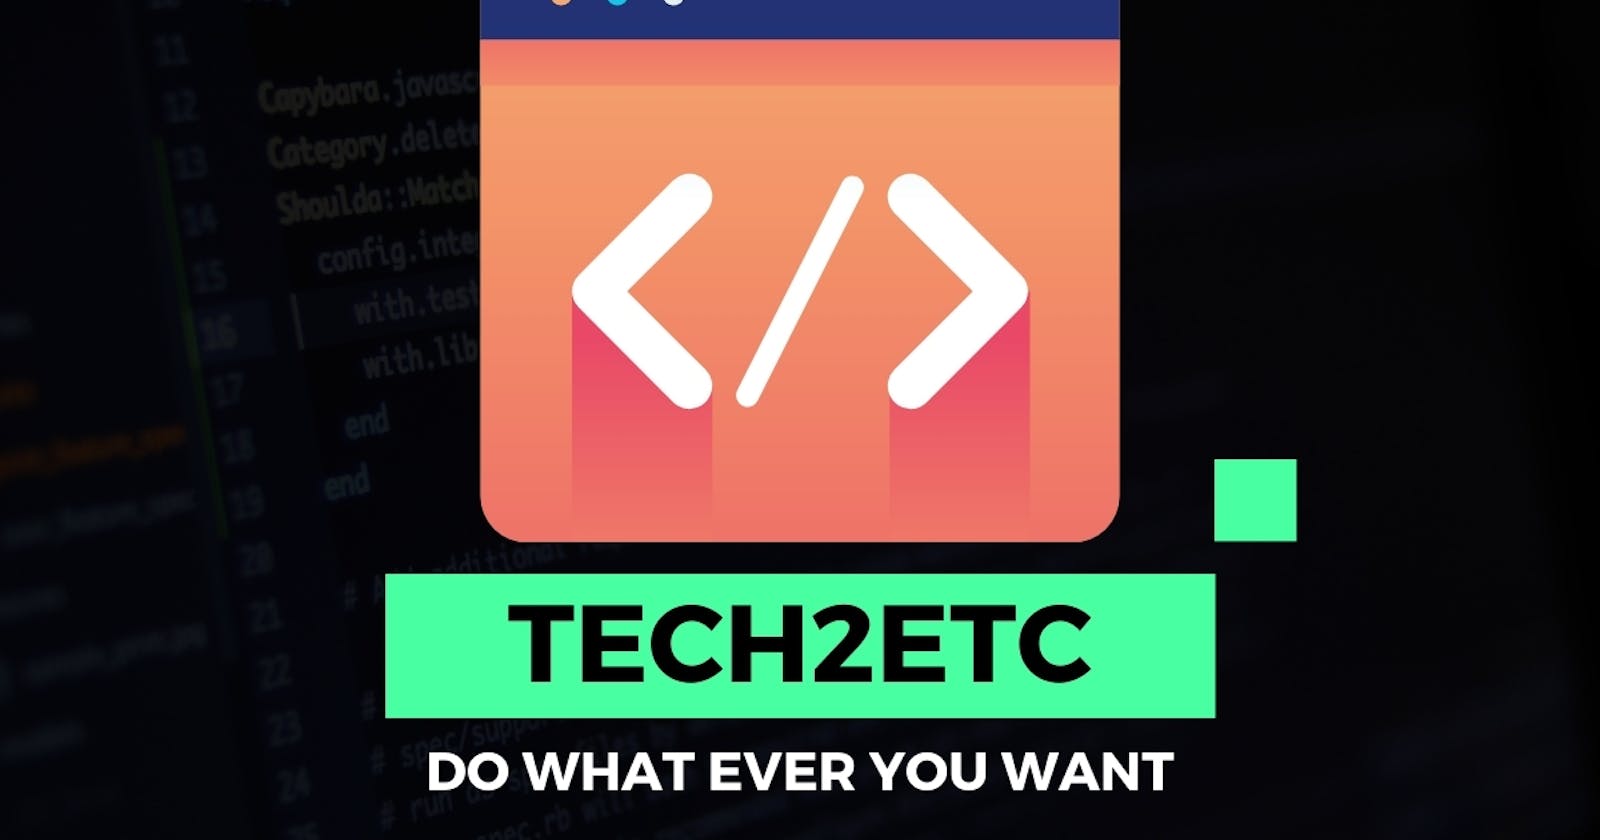 Meet Tech2etc: The Visionary Leader in the Programming Industry